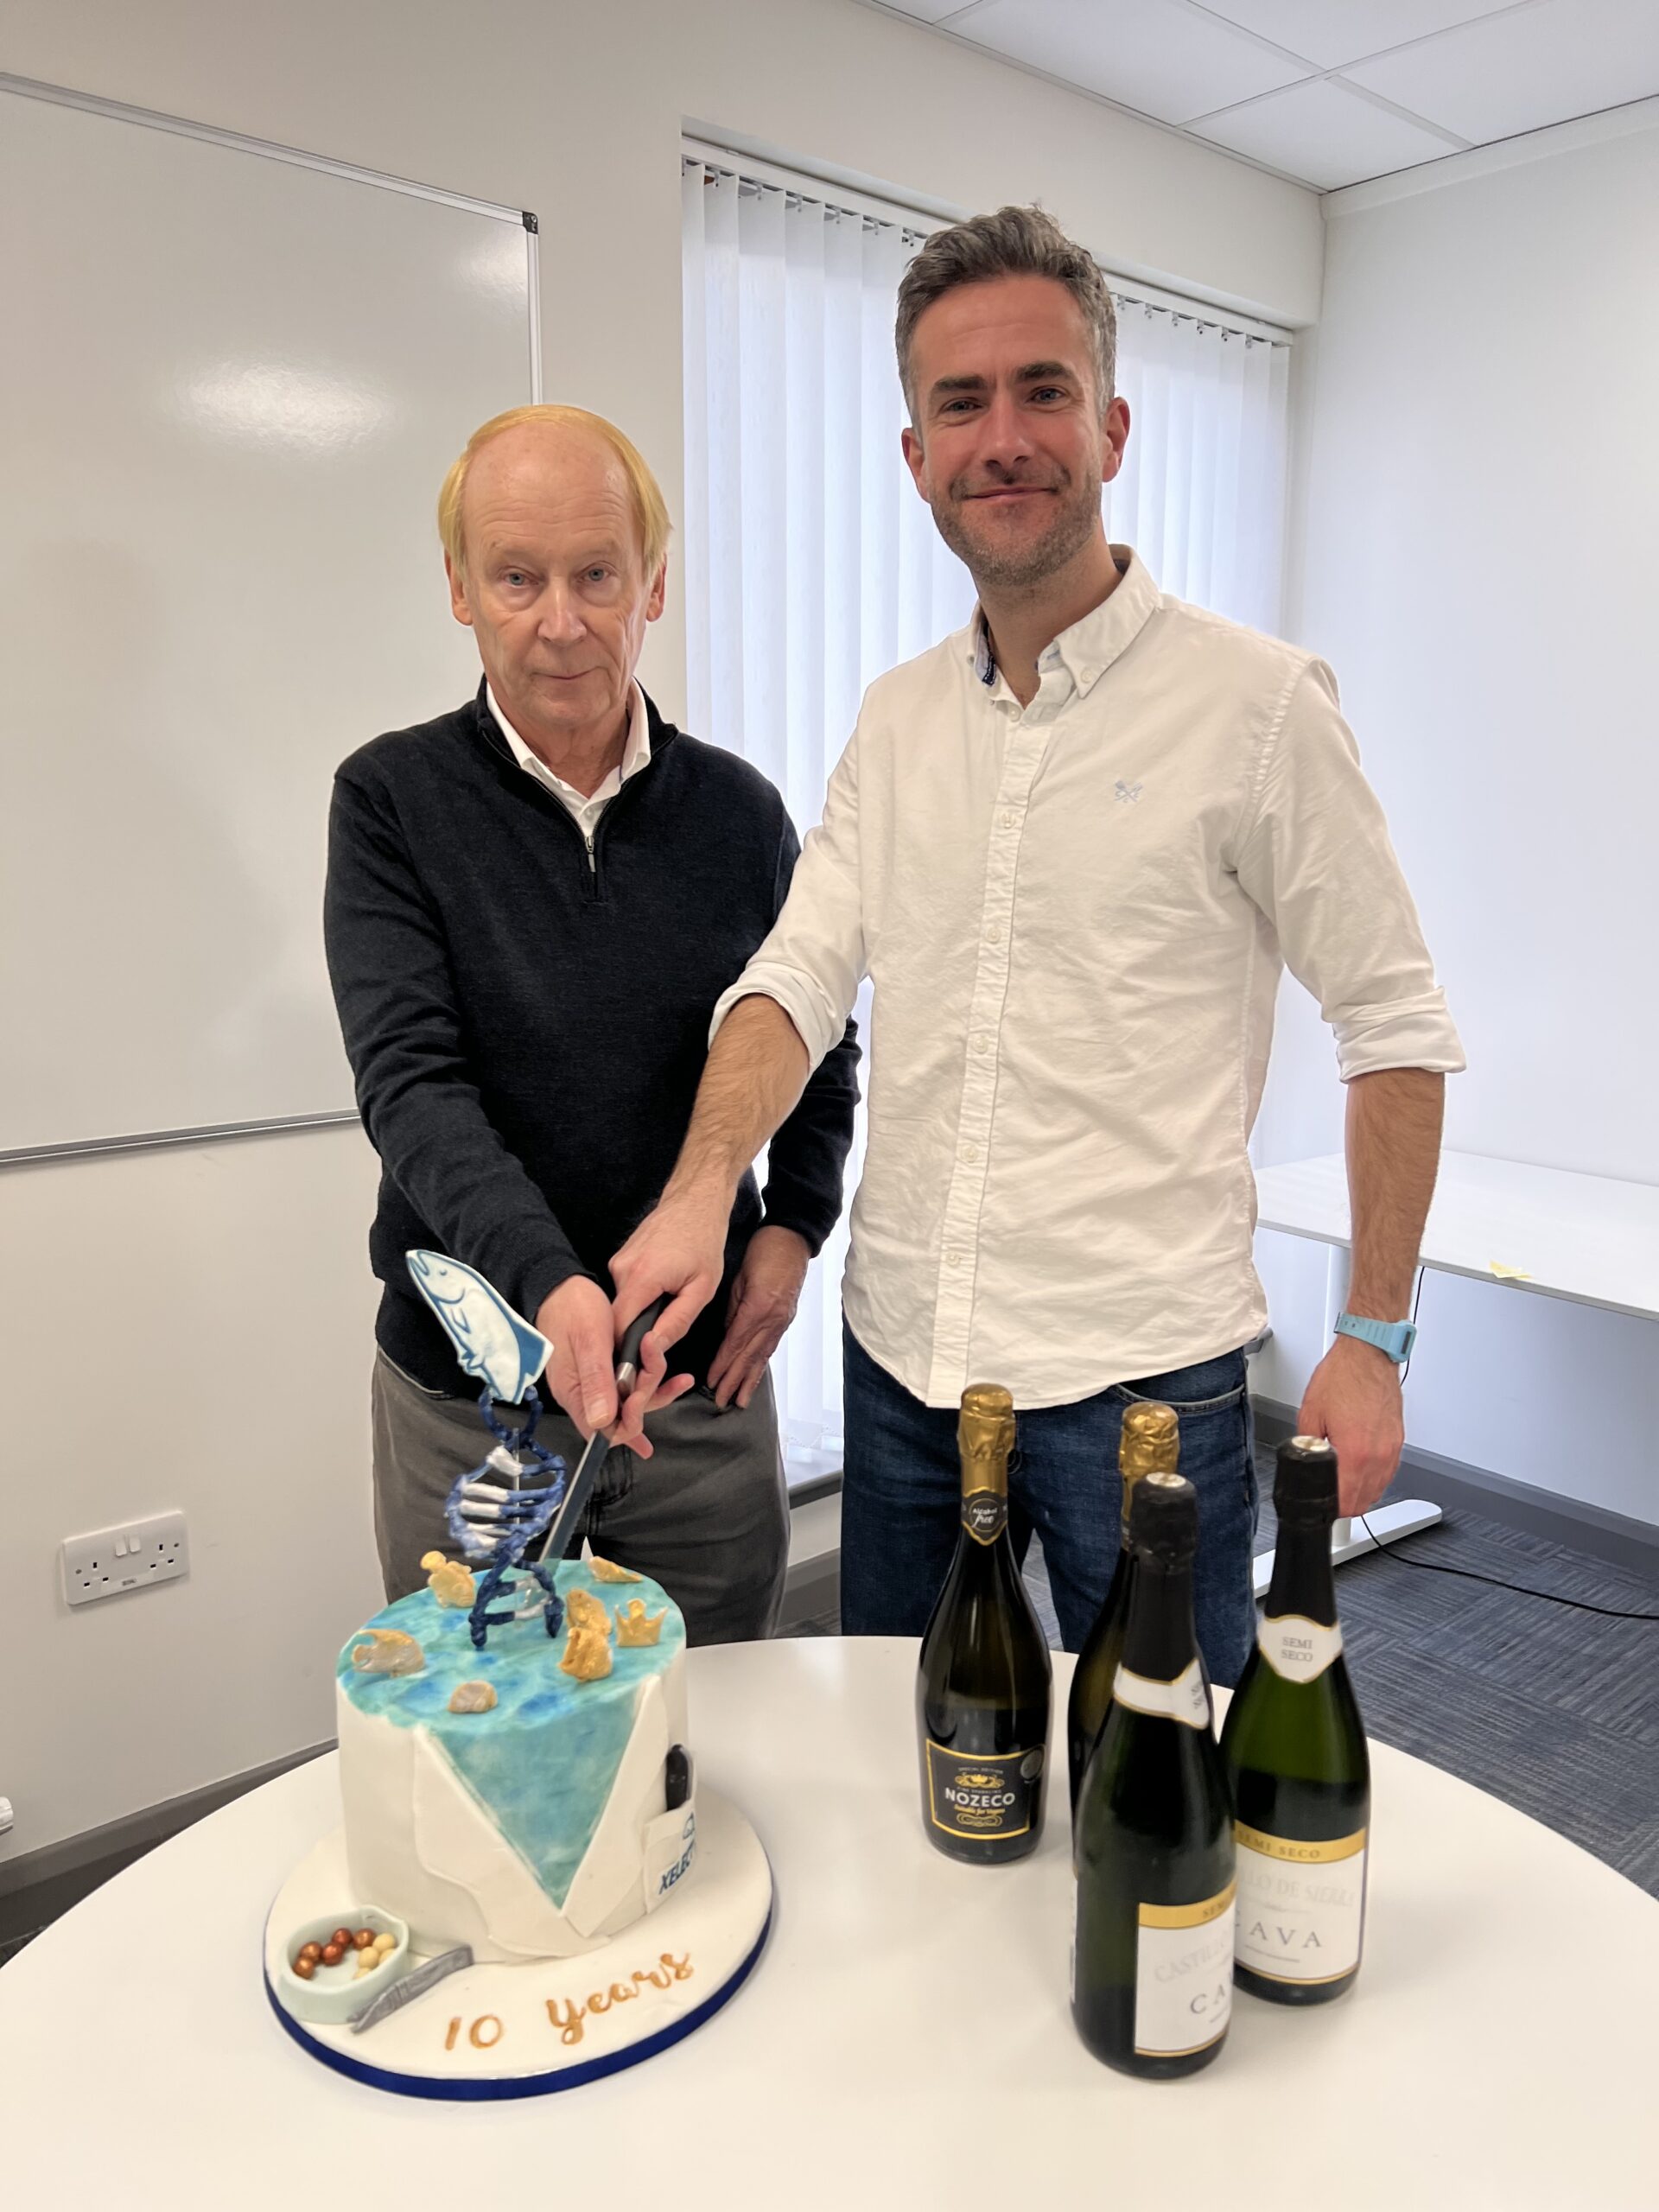 A decade of delivering for our customers – Xelect celebrates 10th Birthday